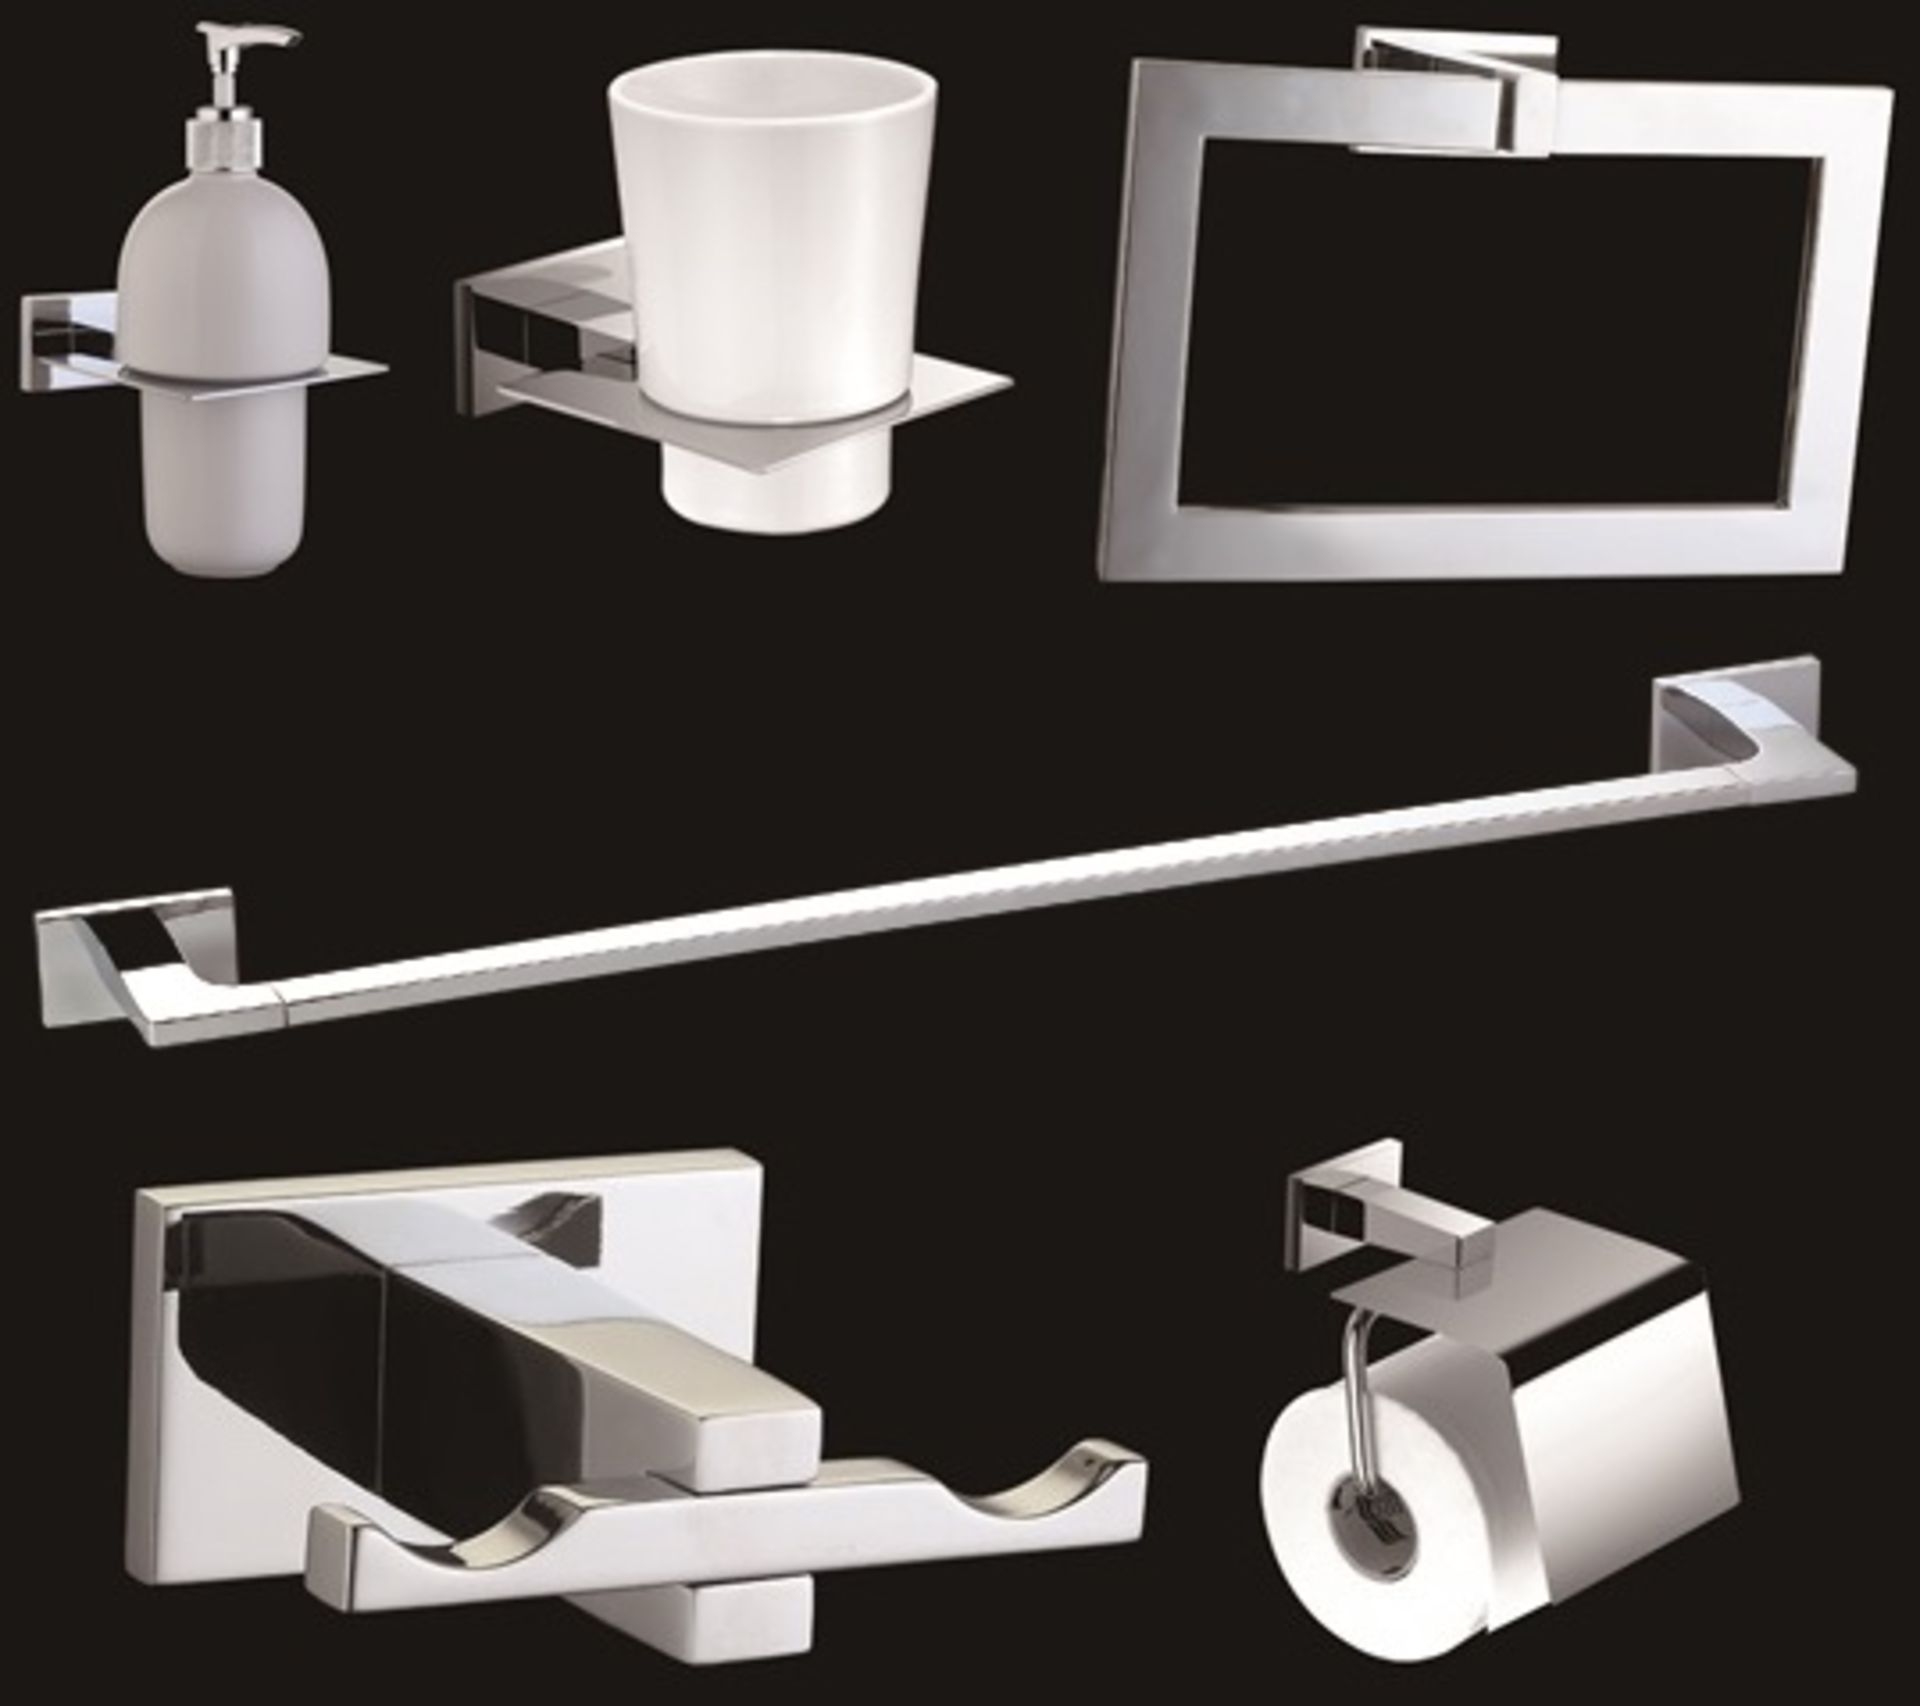 1 x Vogue Series 6 Six Piece Bathroom Accessory Set - Includes WC Roll Holder, Soap Dispenser, - Image 2 of 8